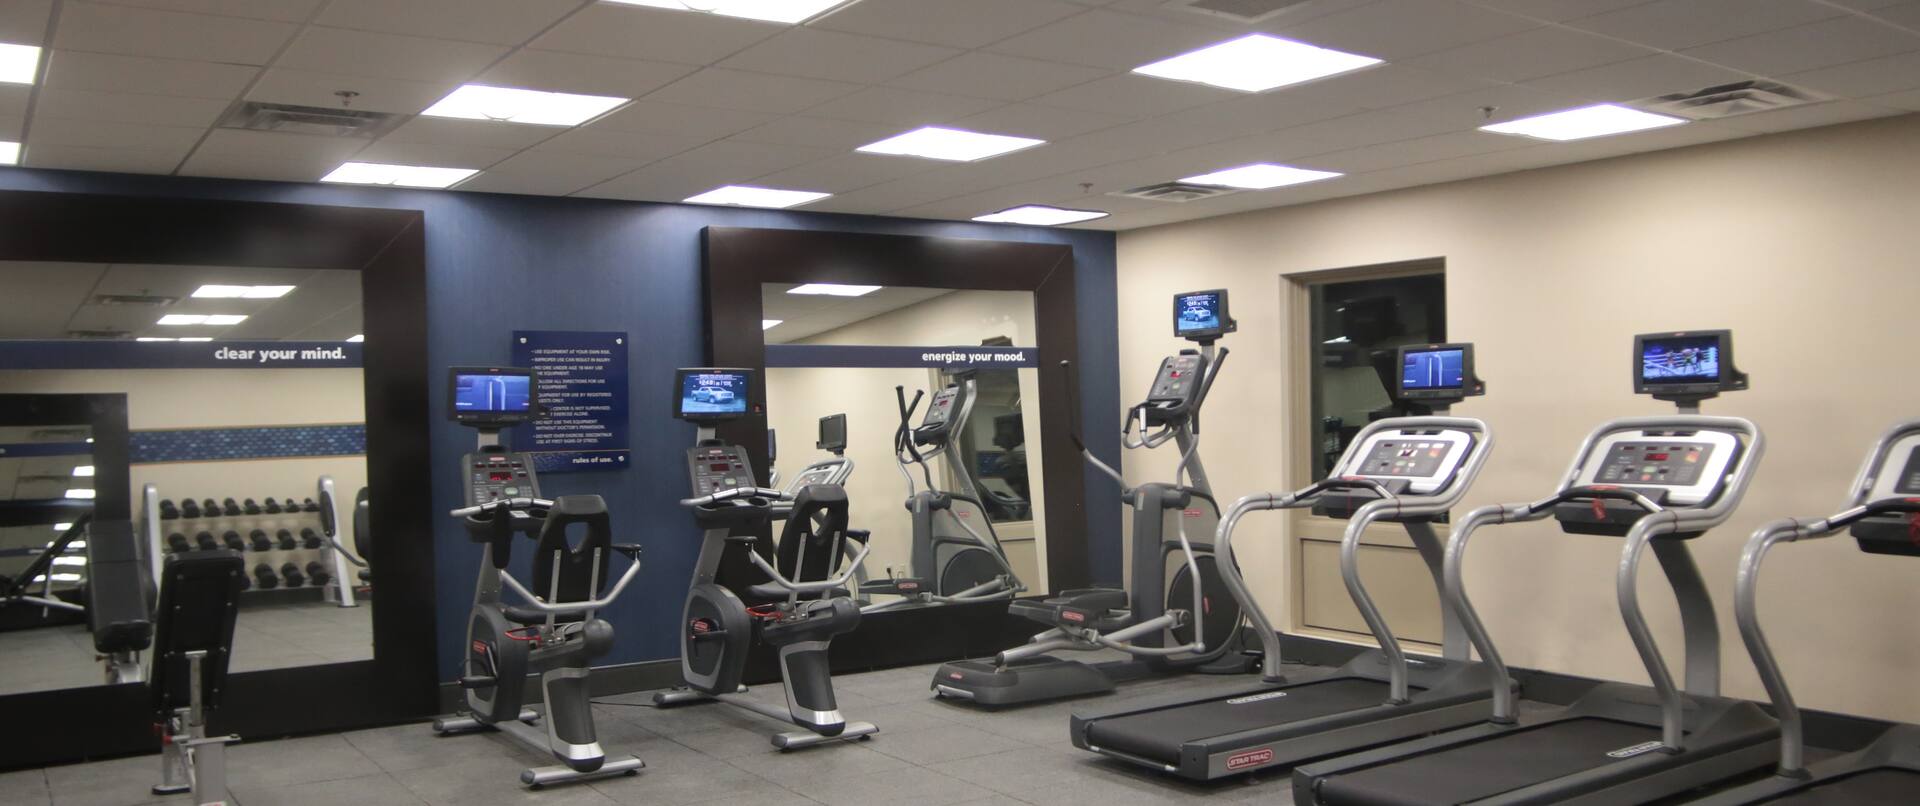 Fitness Center With Large Mirrors, and Cardio Equipment